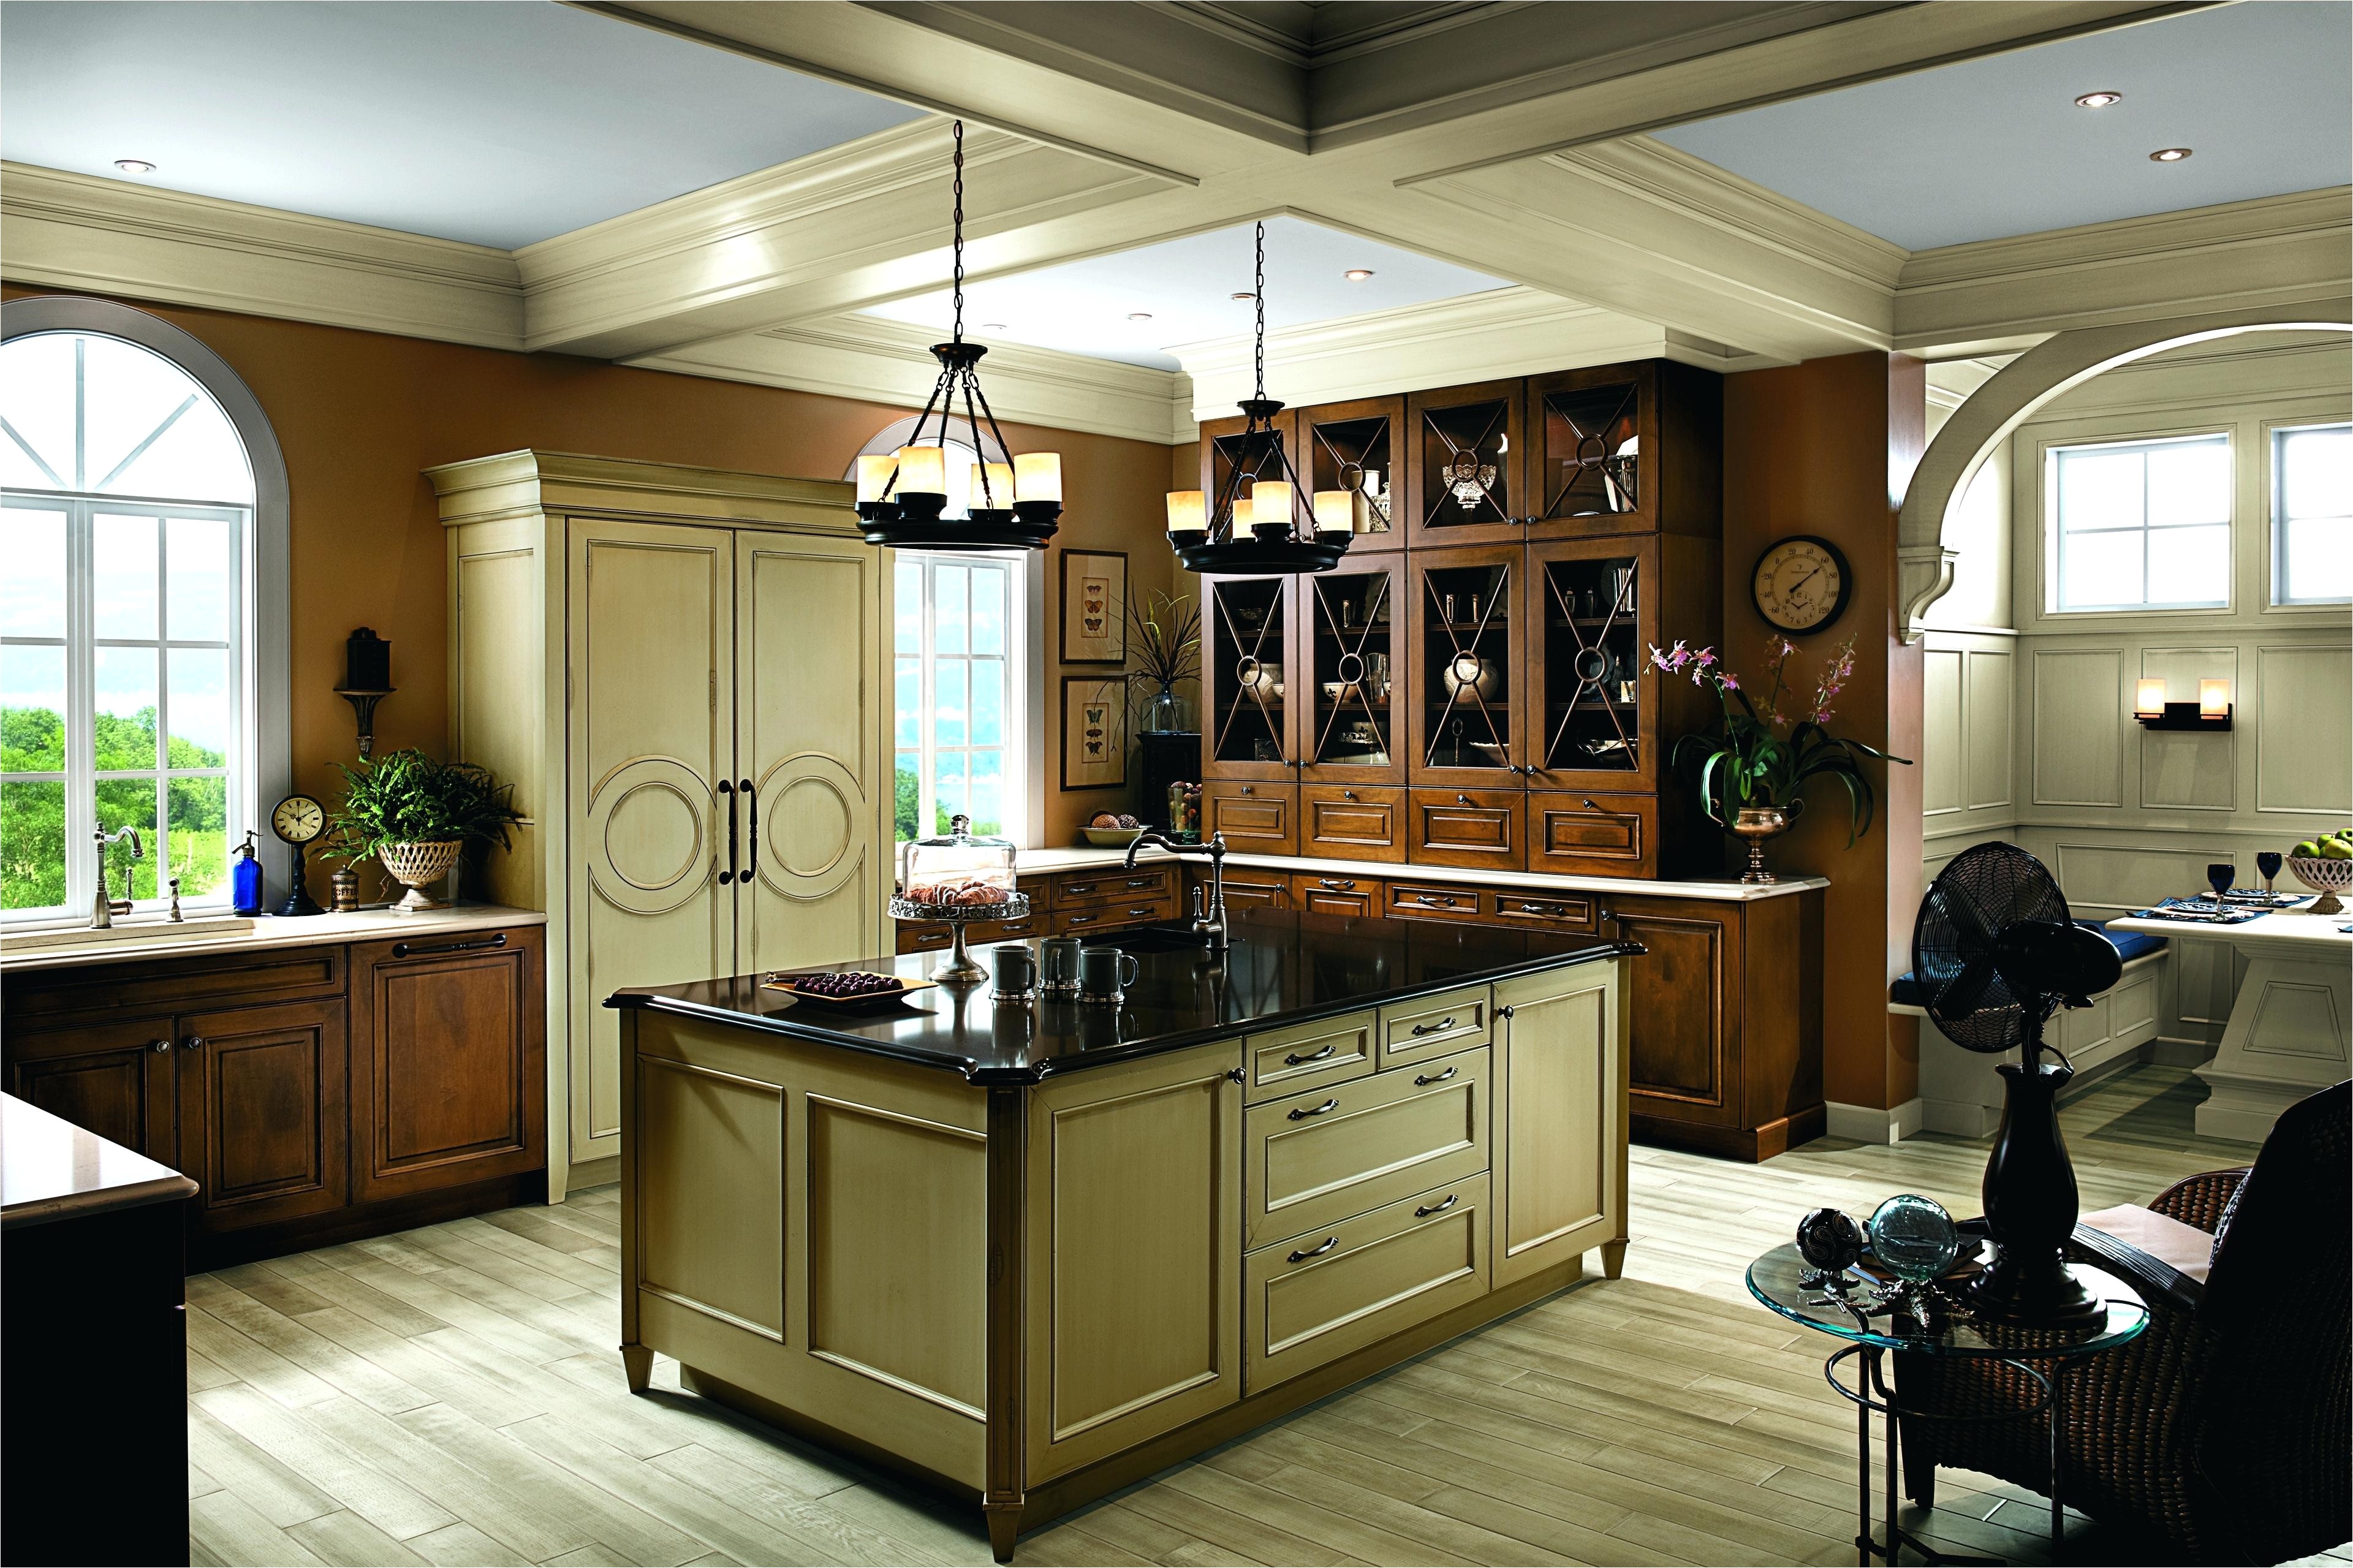 brookhaven cabinets prices brookhaven kitchen cabinets cost and fabulous dining room wall a